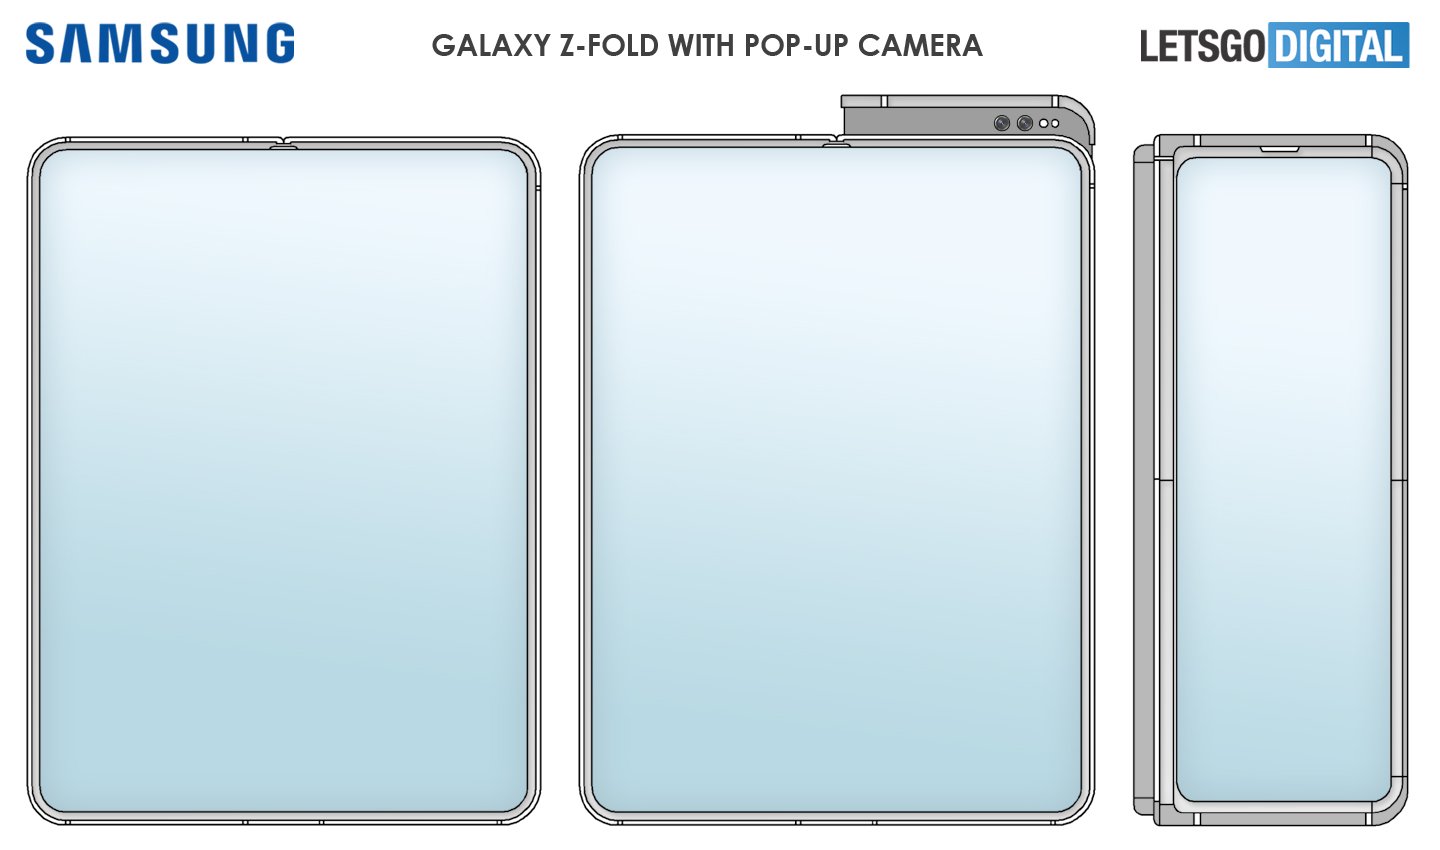 Samsung’s new utility patent imagines foldable smartphones with pop-up camera module